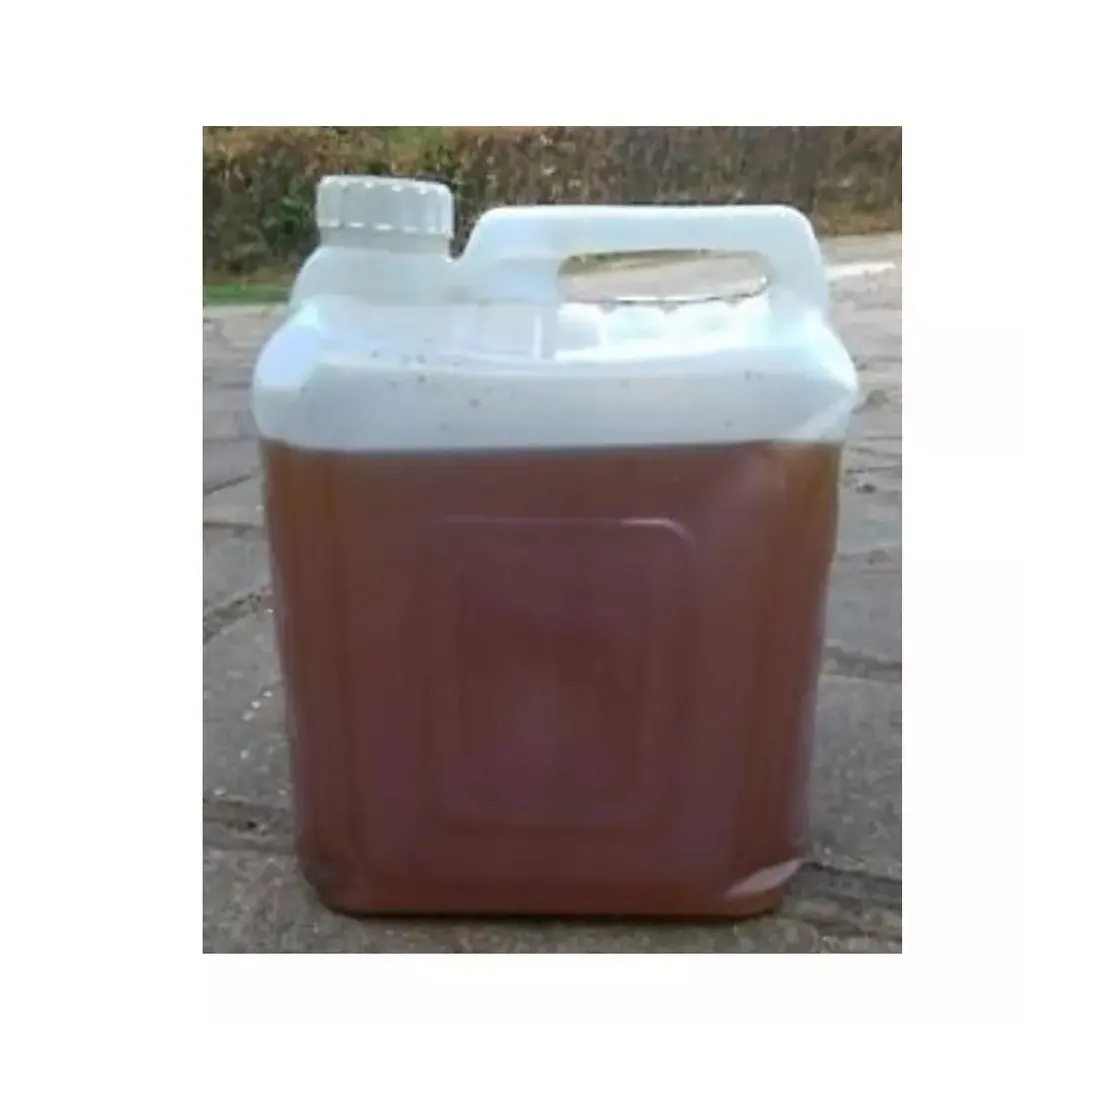 1kg Refined Sunflower Used Cooking Oil crude sunflower oil Sunflower Oil Refined For Sale